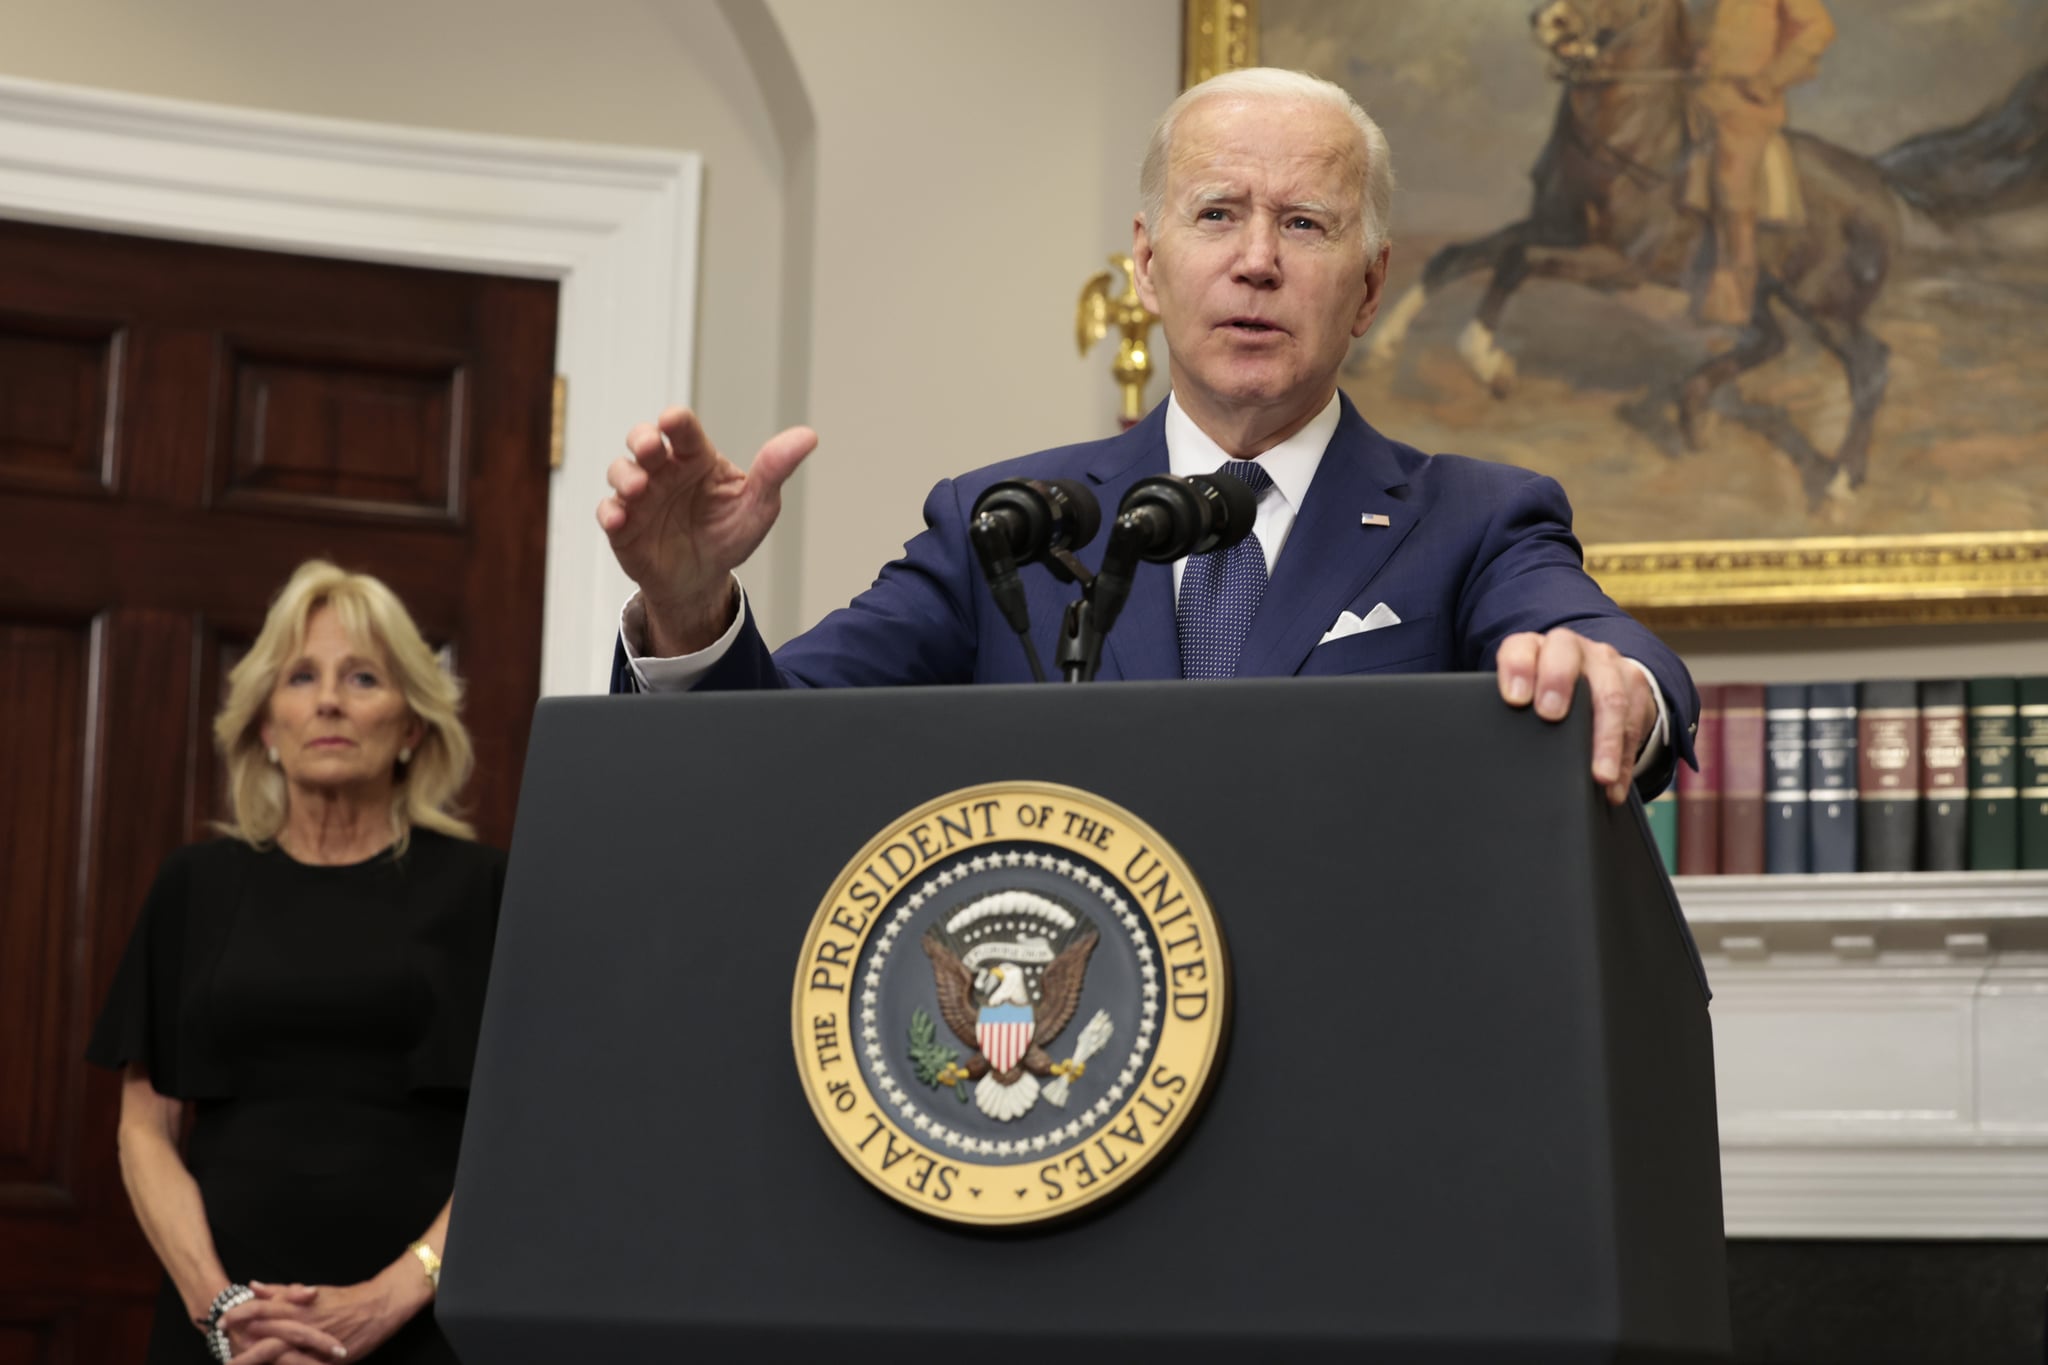 WASHINGTON, DC - MAY 24: U.S. President Joe Biden delivers remarks from the Roosevelt Room of the White House as first lady Jill Biden looks on concerning the mass shooting at a Texas elementary school on May 24, 2022 in Washington, DC. Eighteen people are dead after a gunman today opened fire at the Robb Elementary School in Uvalde, Texas, according to published reports.  (Photo by Anna Moneymaker/Getty Images)